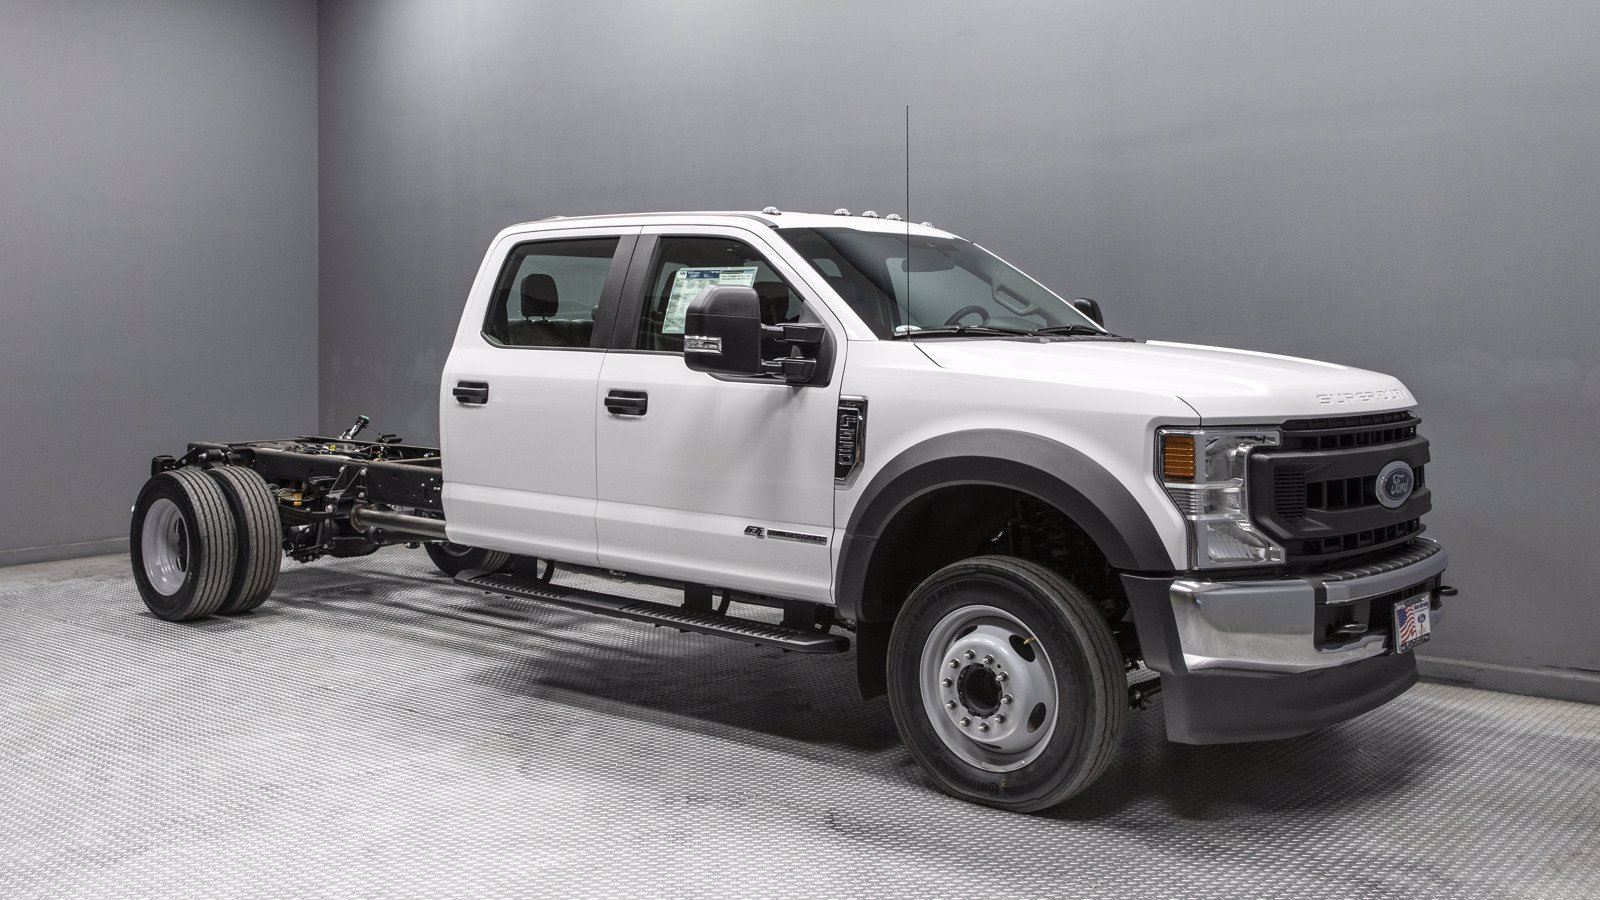 New 2020 Ford Super Duty F550 DRW XL Crew Cab ChassisCab in Buena